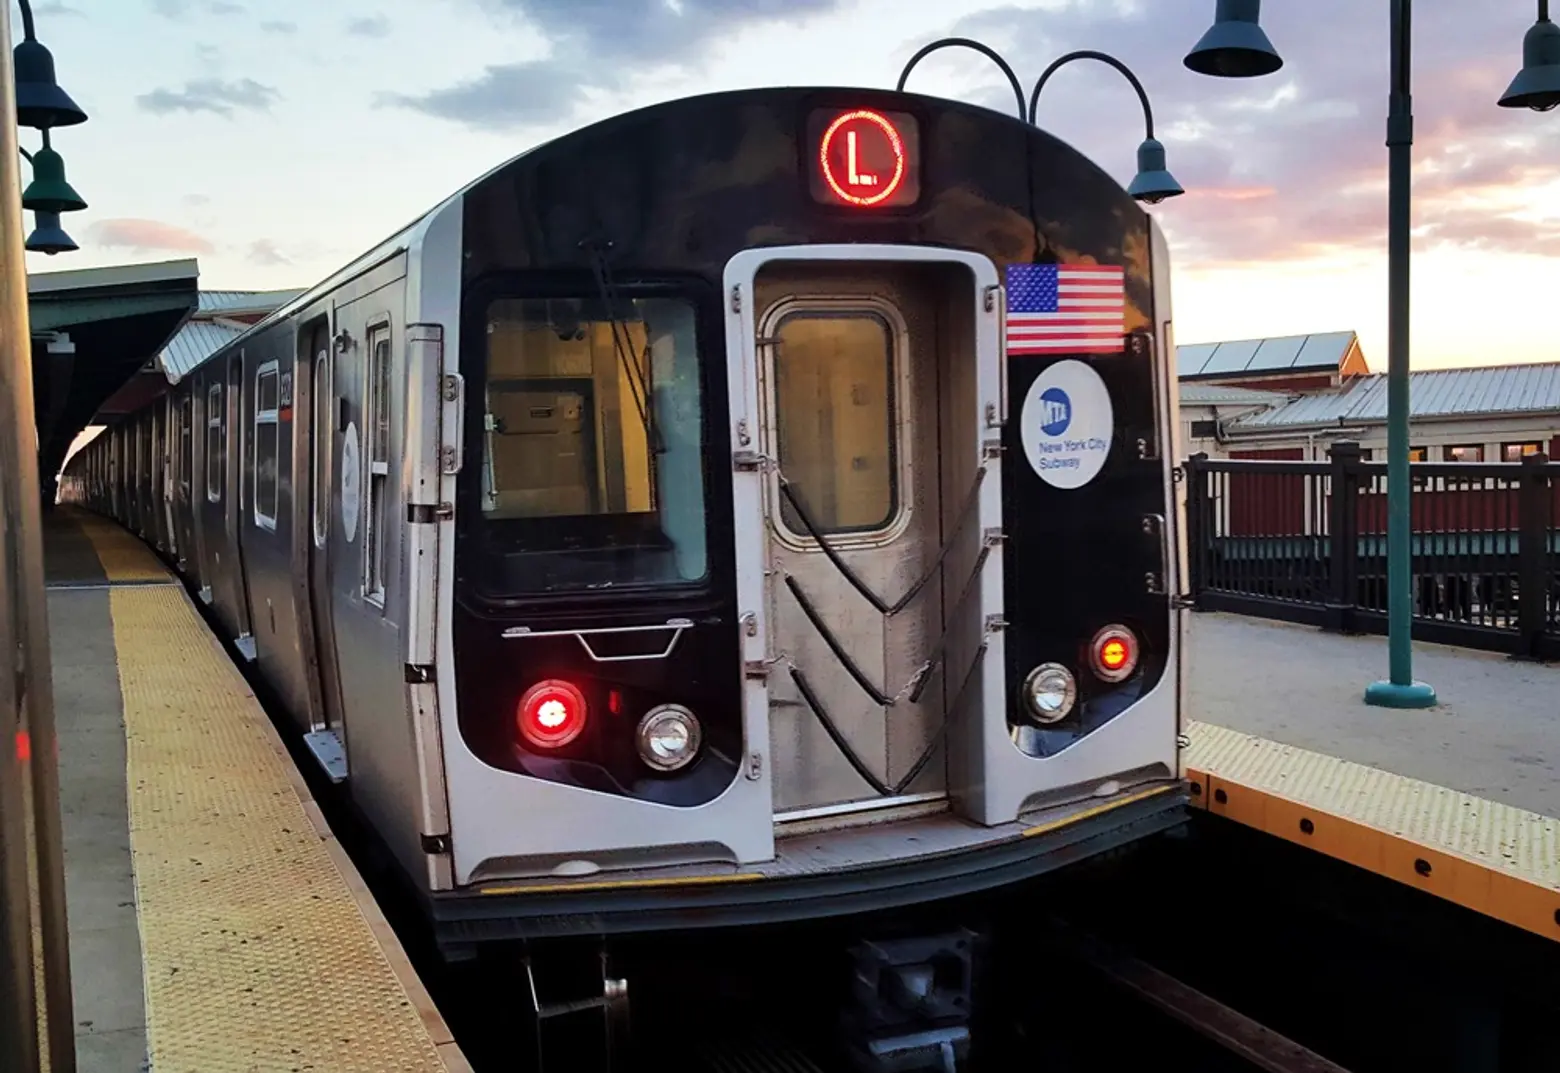 MTA releases plan to address impending 15-month shutdown of L train